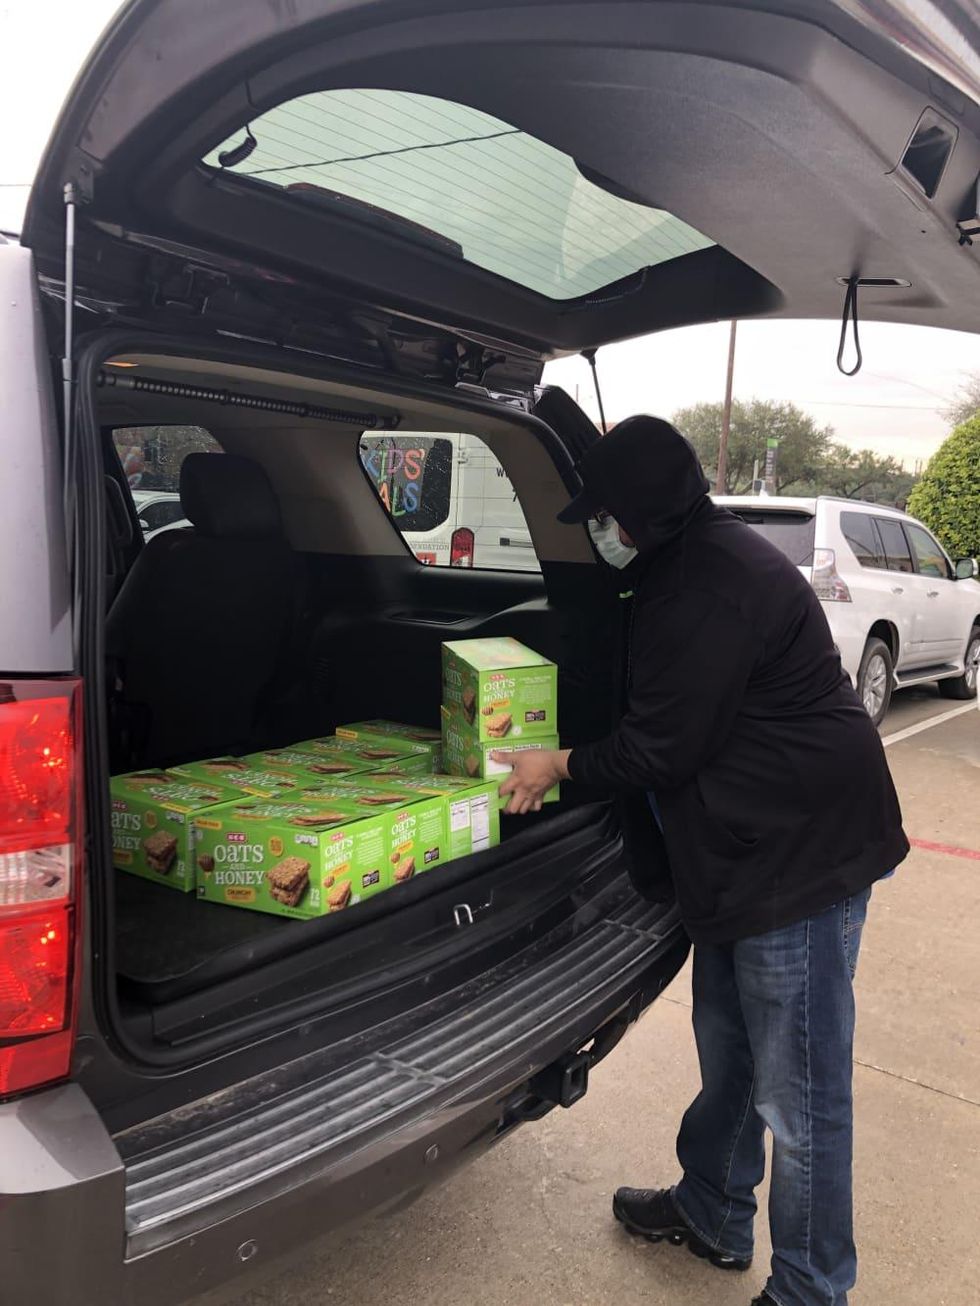 Frost Houston donation drive-through